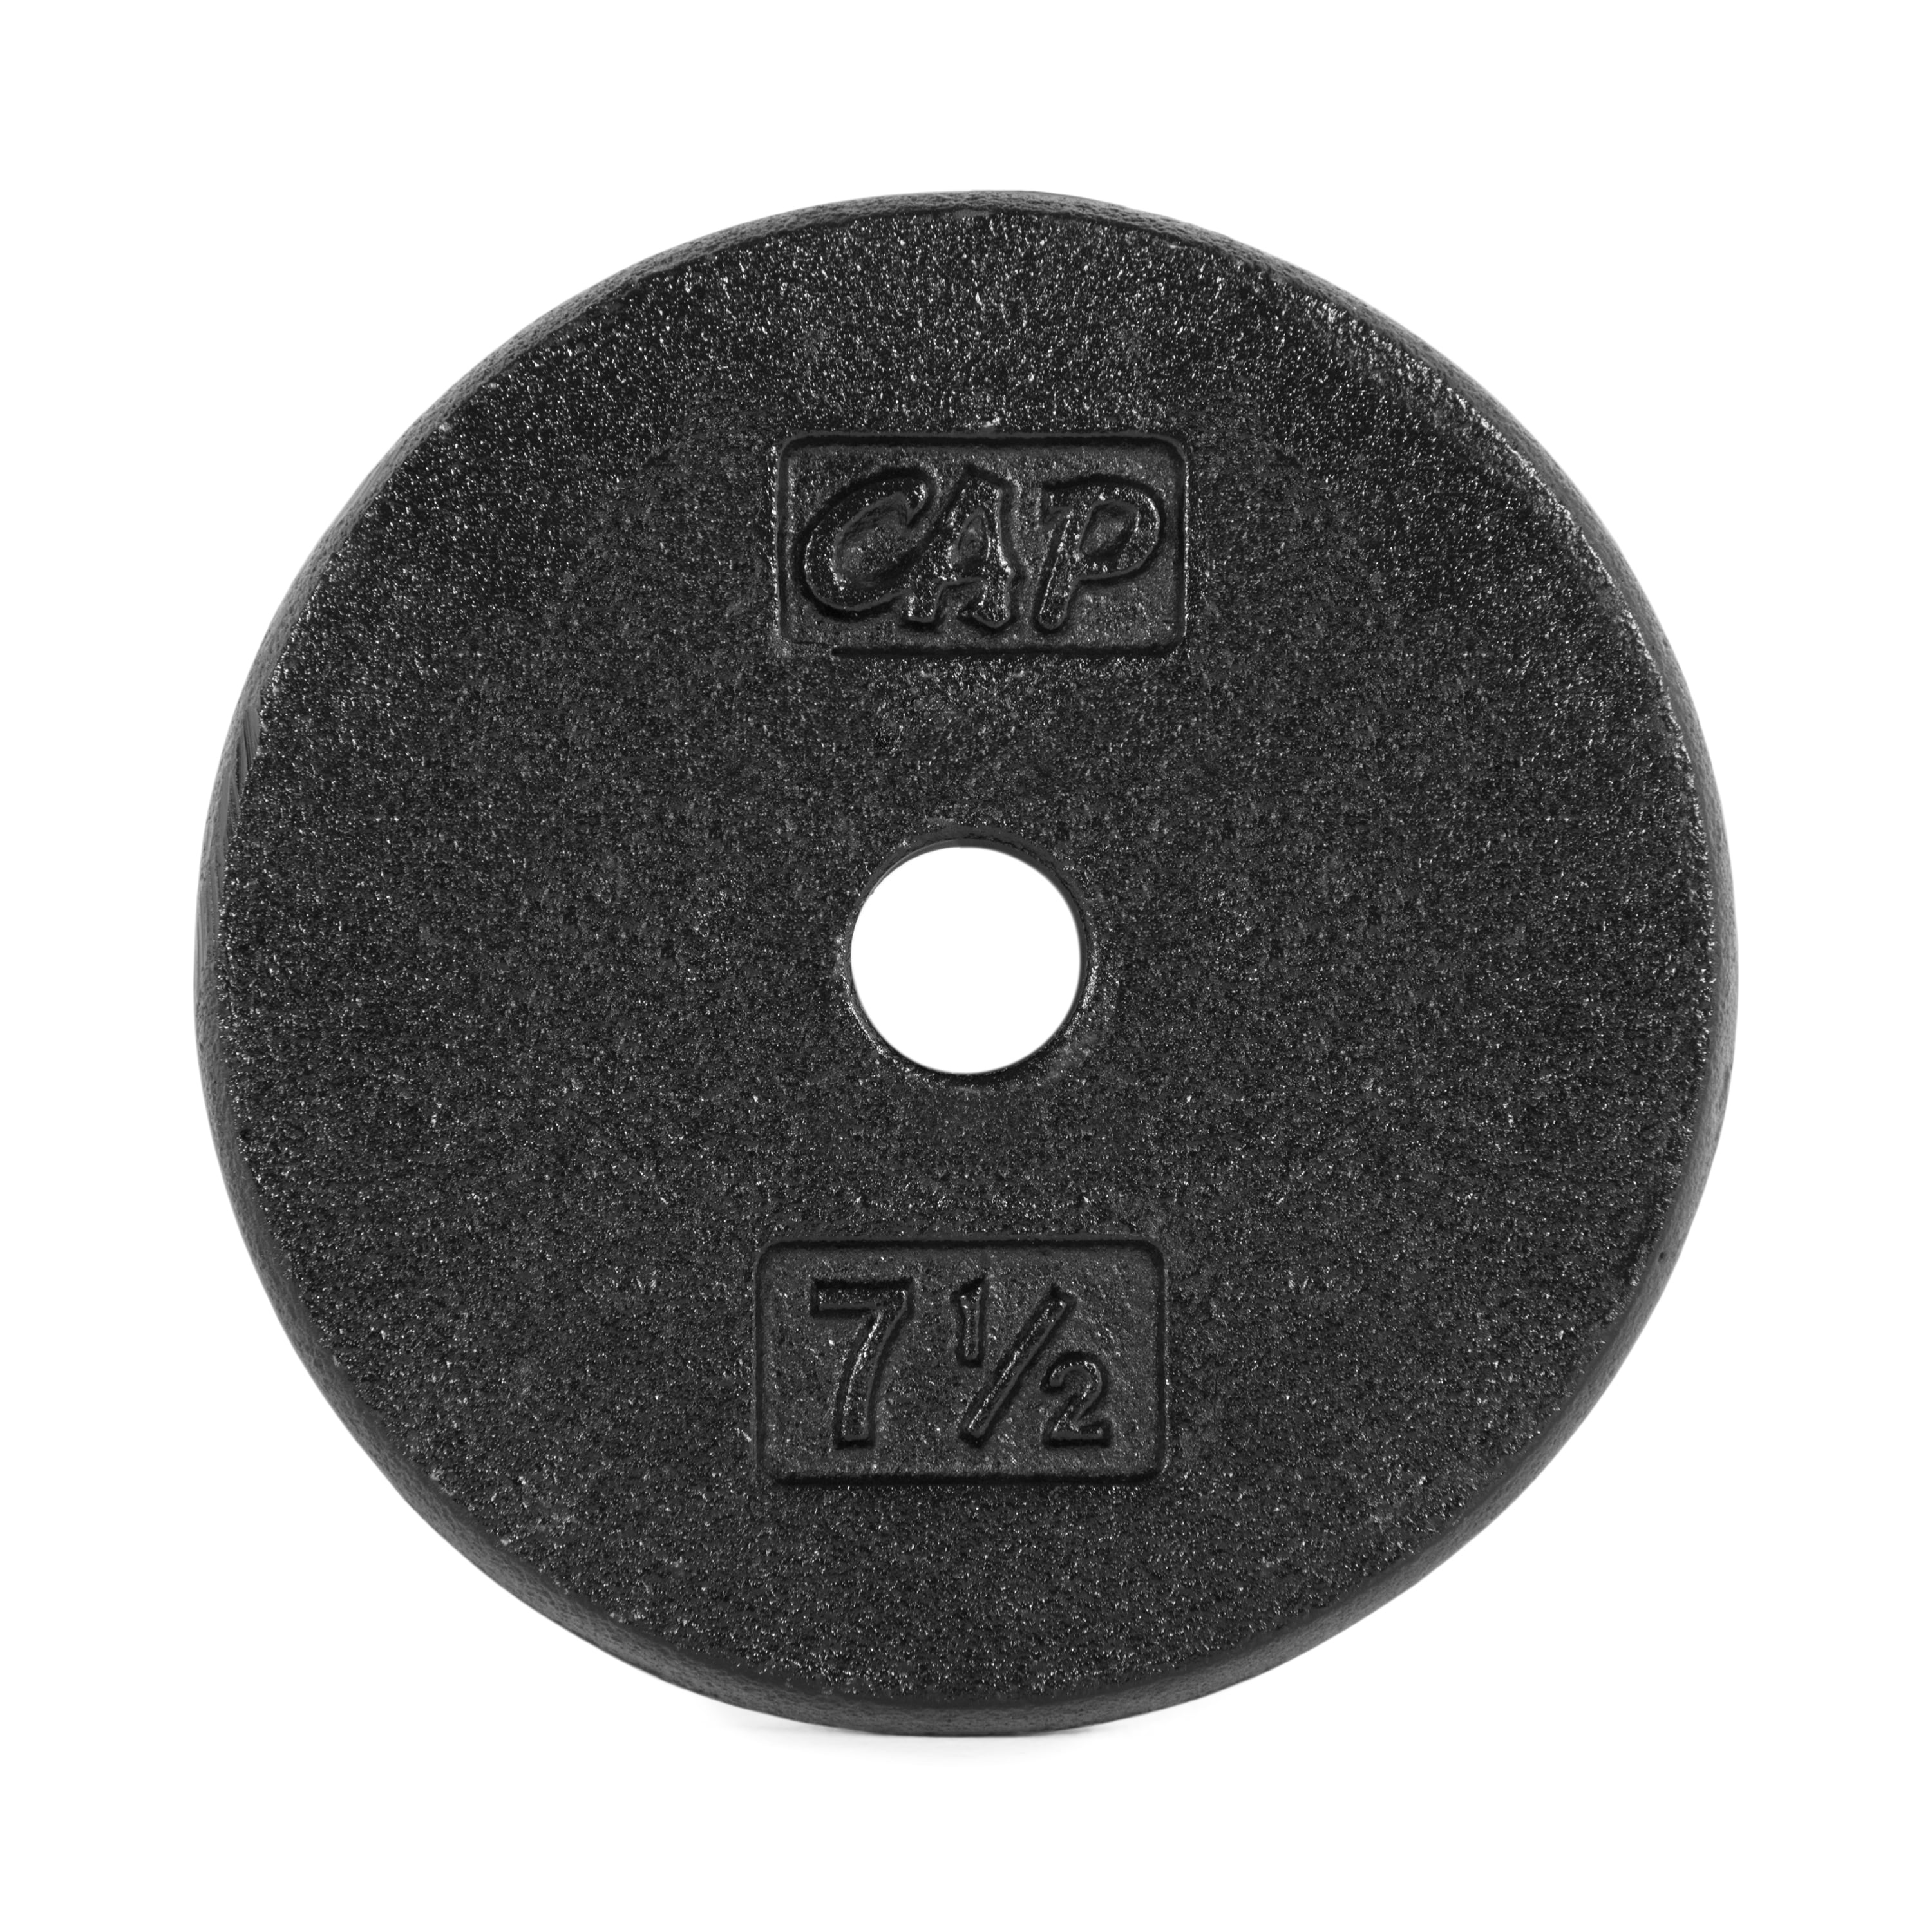 Cap 25 lb Pound Barbell Weight Plates PAIR Fits 1" Bar 50 lbs Total BRAND NEW 